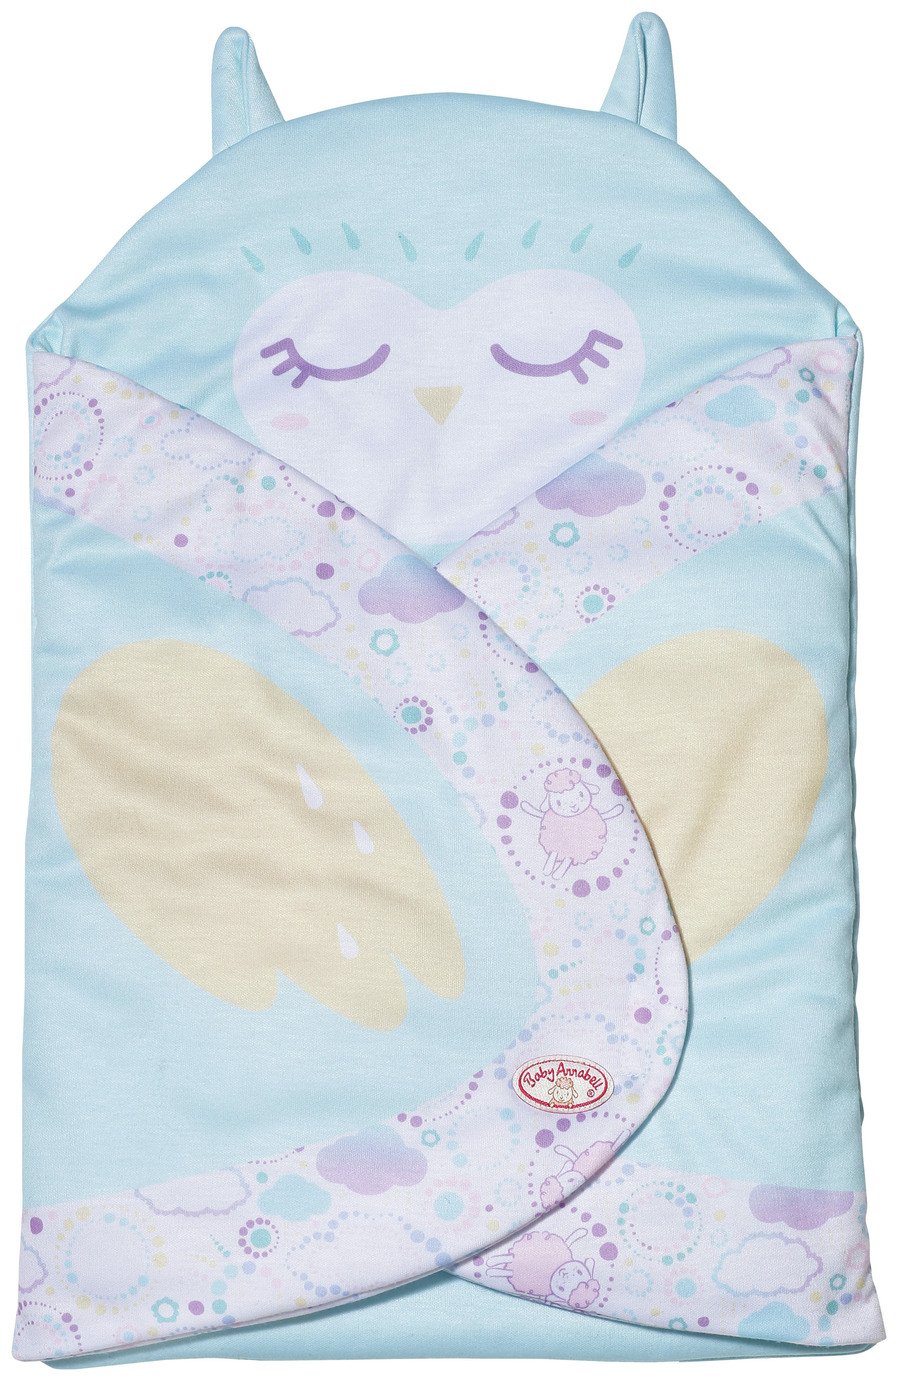 Baby Annabell Sweet Dreams Dolls Swaddle Bag